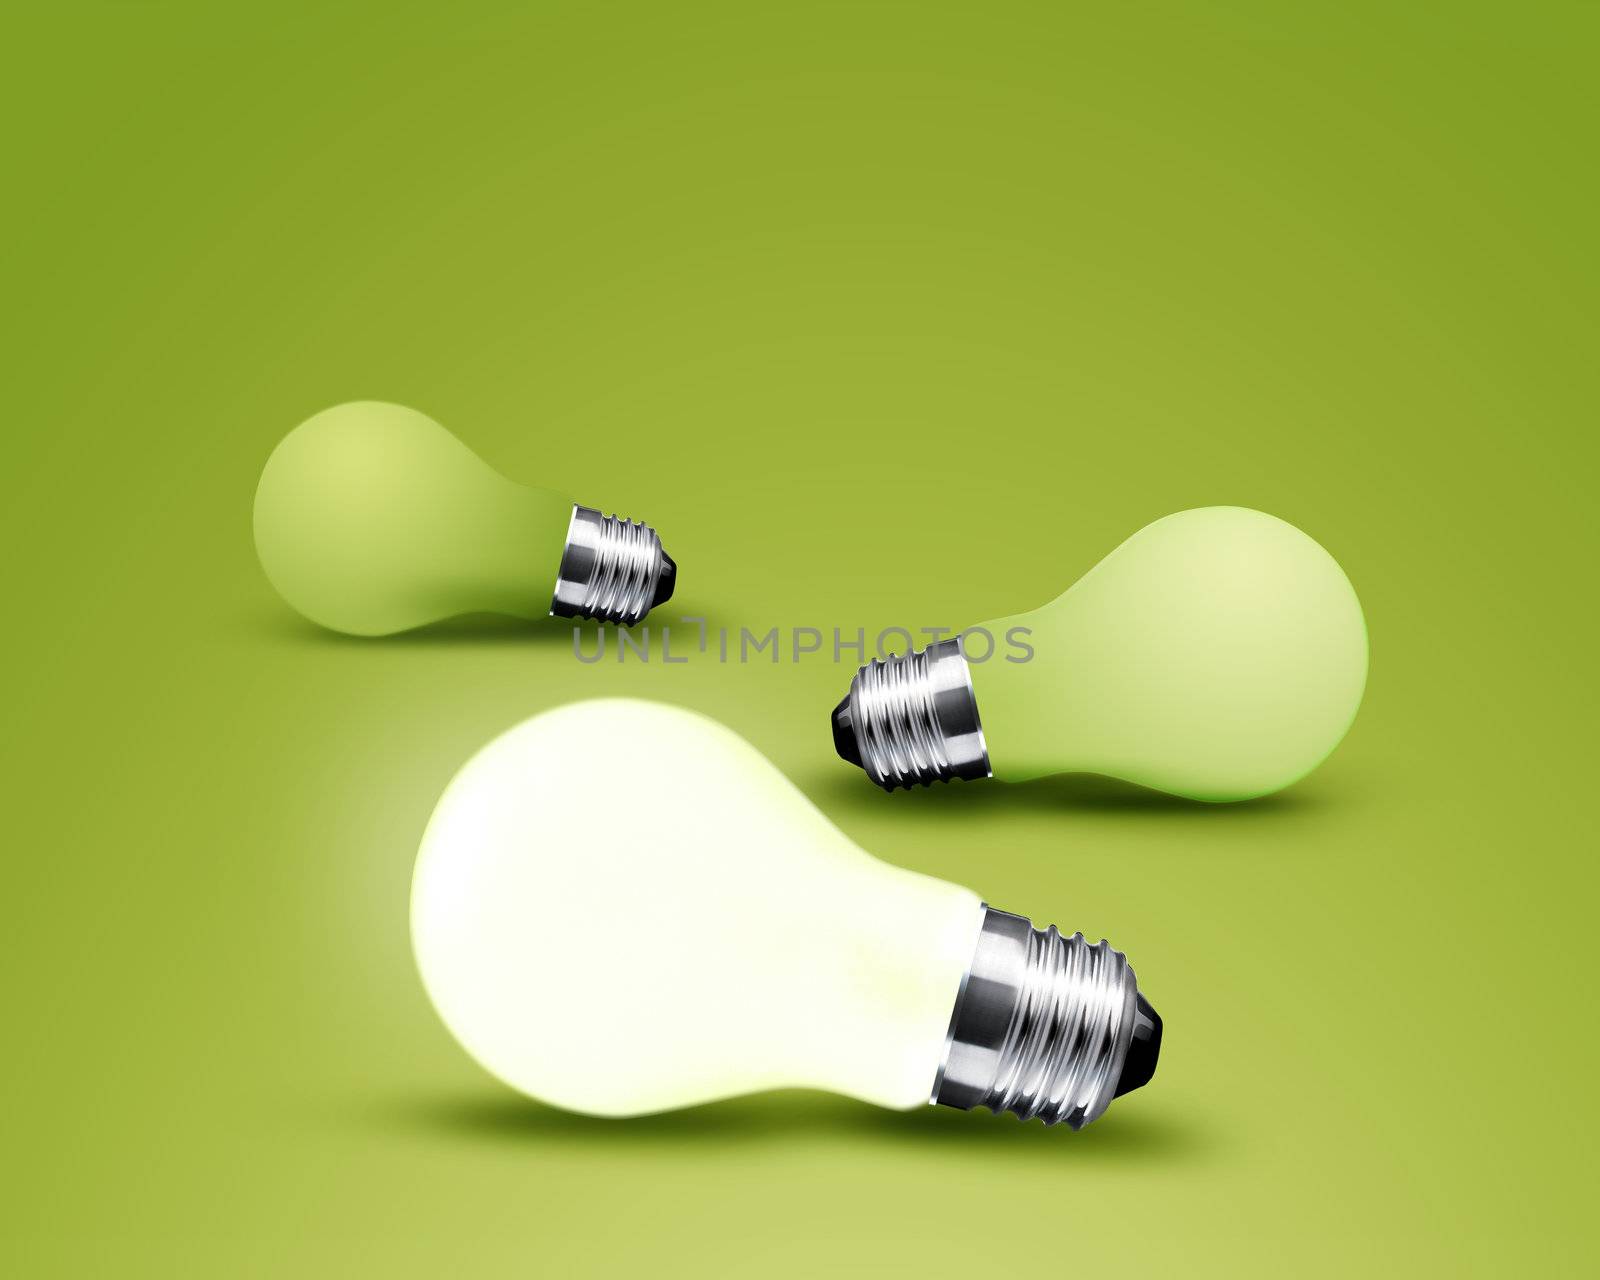 one glowing Light bulb from three Light bulb idea on green background